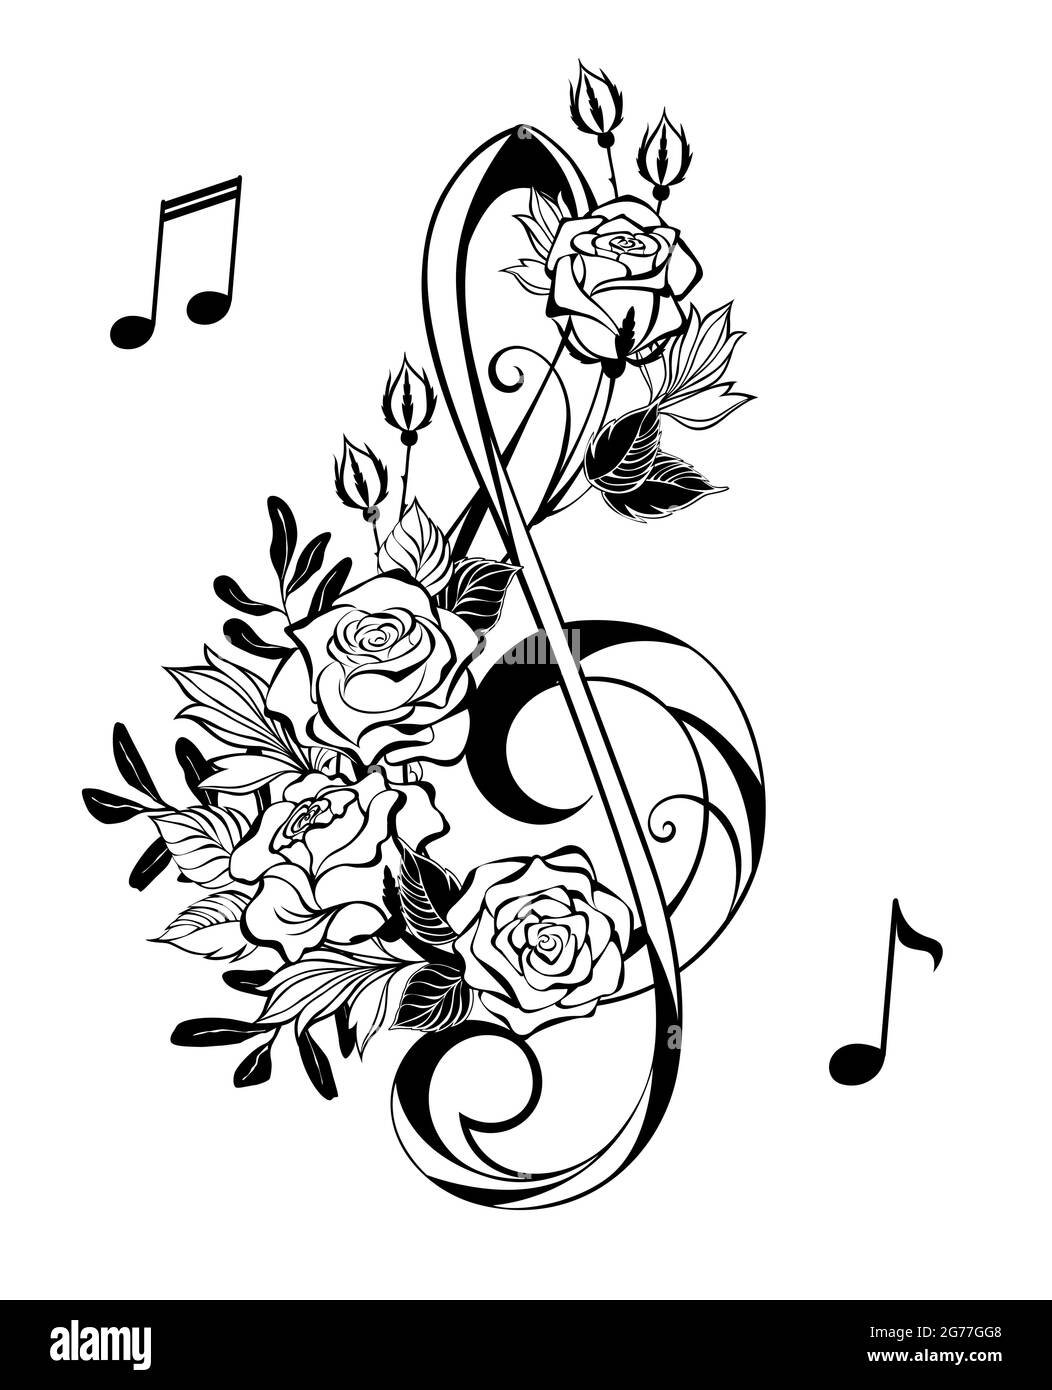 Black contour key with artistic, outline roses with black leaves on white background. Tattoo style. Treble clef. Stock Vector